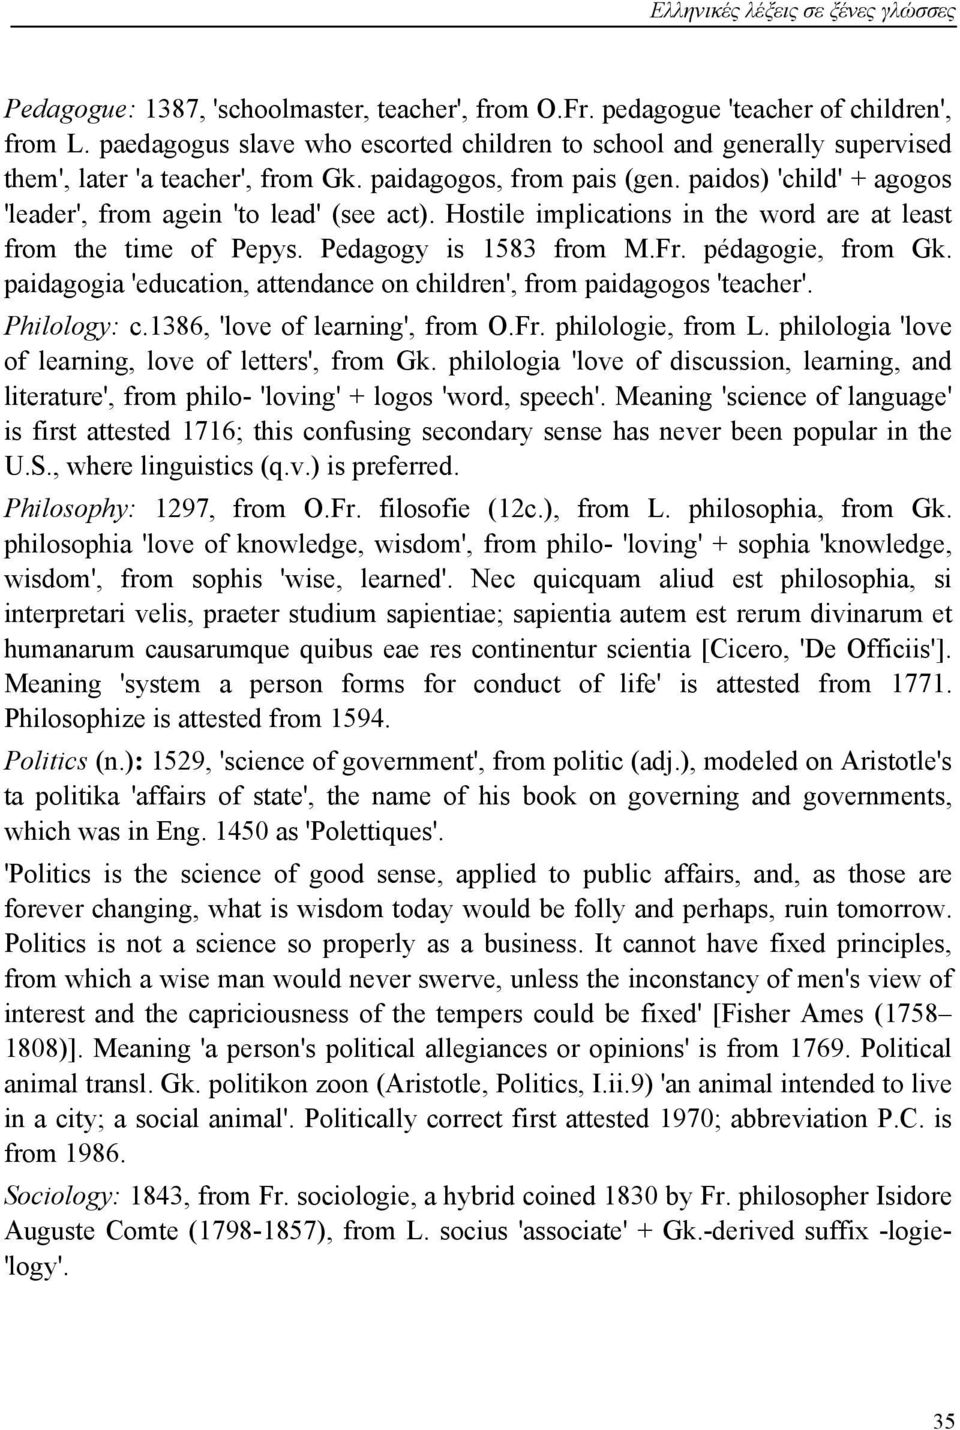 paidos) 'child' + agogos 'leader', from agein 'to lead' (see act). Hostile implications in the word are at least from the time of Pepys. Pedagogy is 1583 from M.Fr. pédagogie, from Gk.